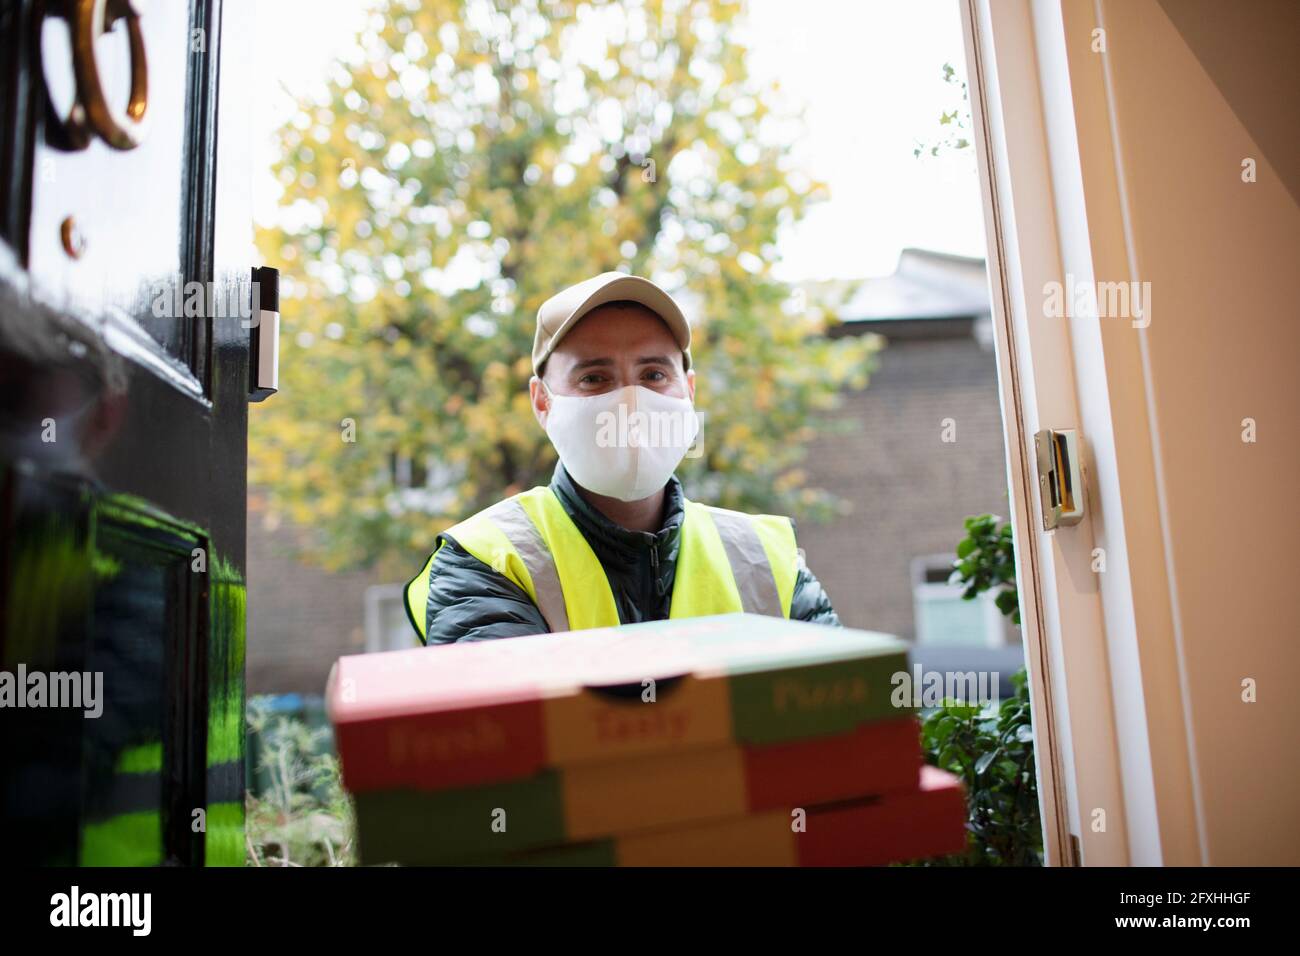 Portrait delivery man in face mask delivering pizza at front door Stock Photo